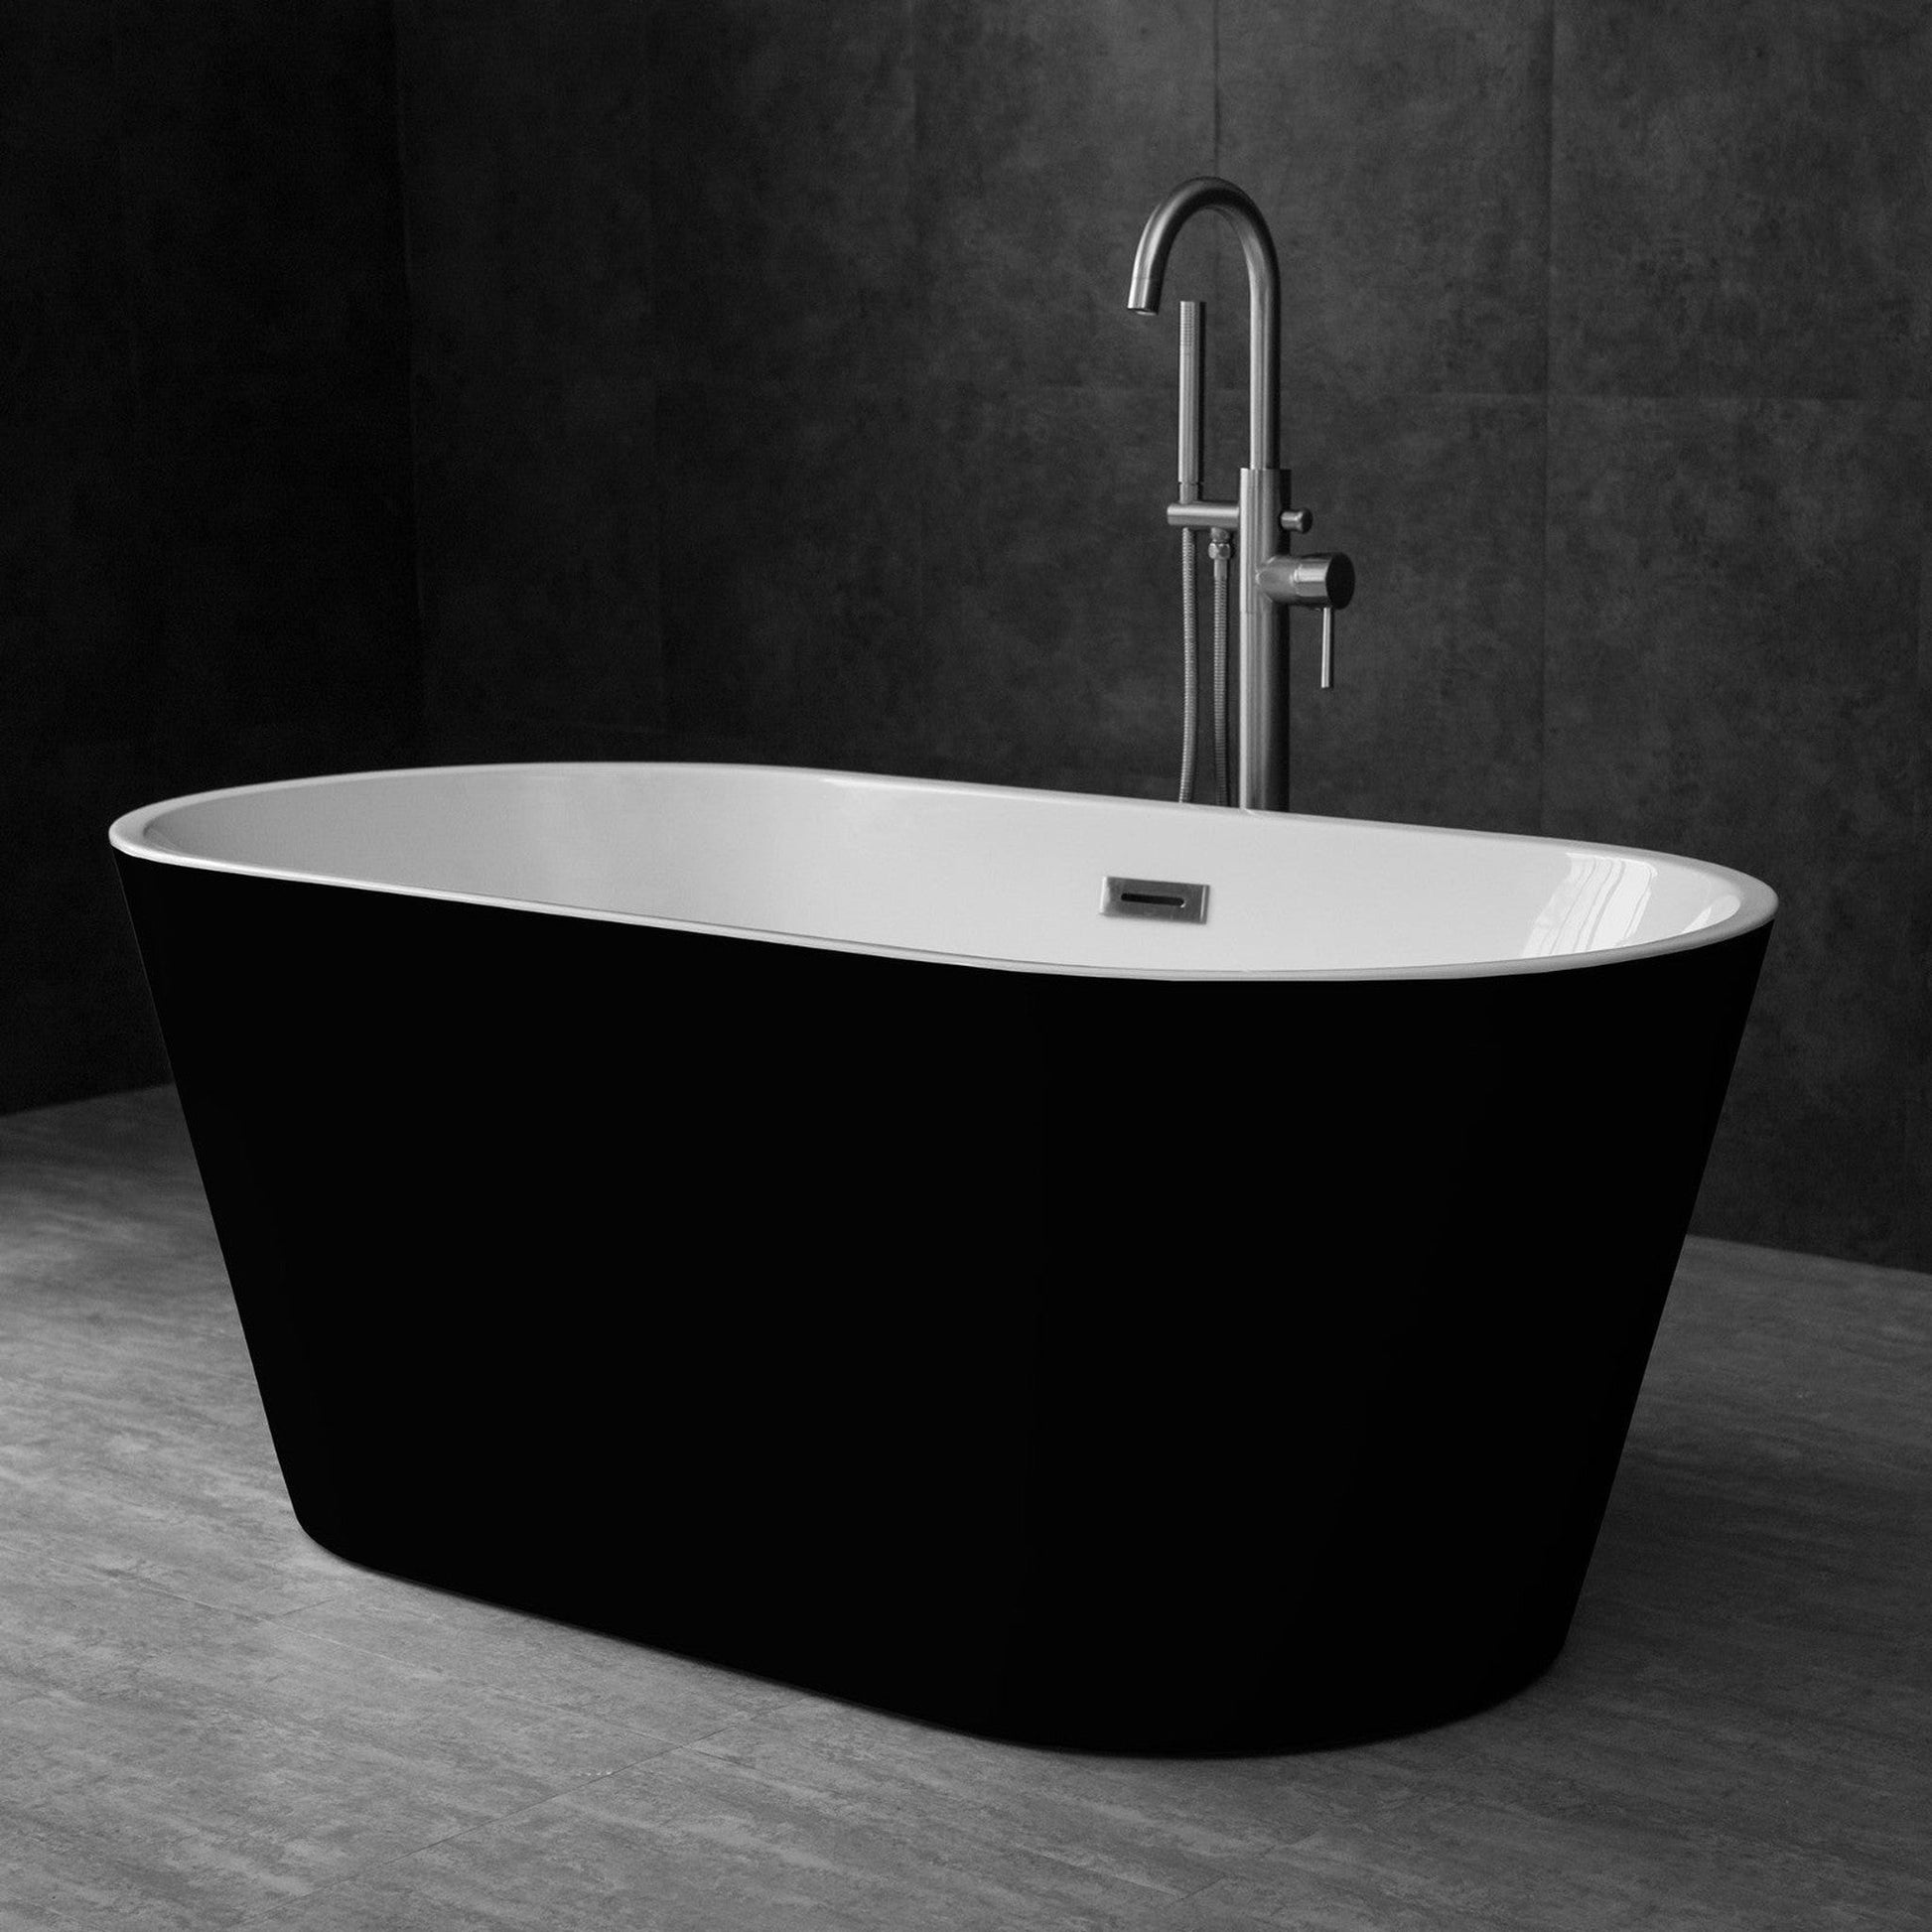 WoodBridge 59" Black Acrylic Freestanding Contemporary Soaking Bathtub With Brushed Nickel Drain, Overflow, F0023BNVT Tub Filler and Caddy Tray